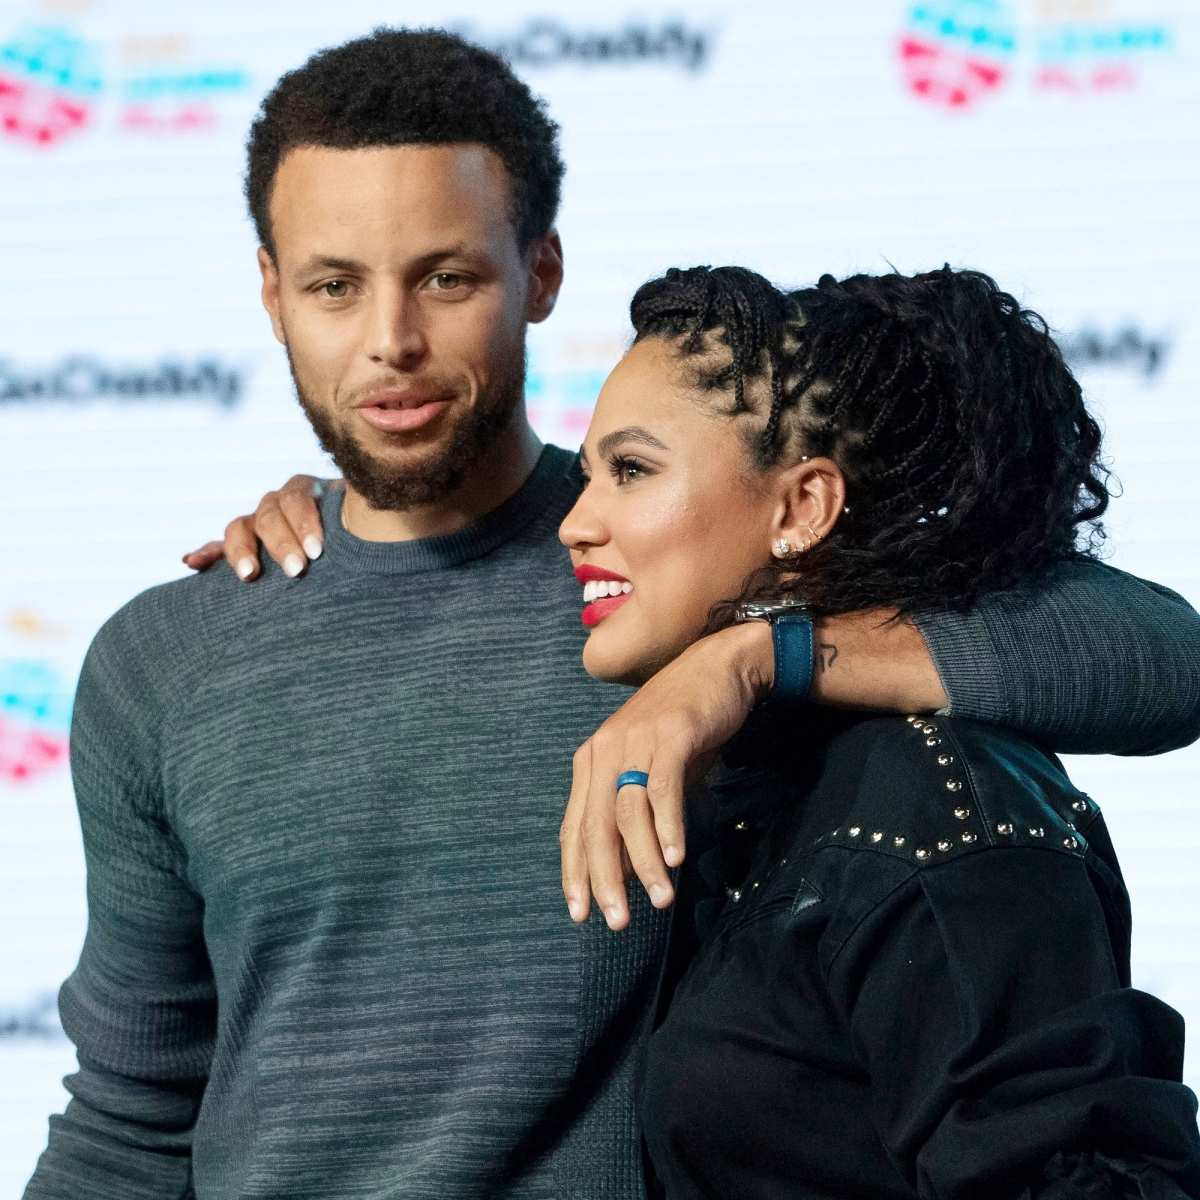 Stephen and Ayesha Curry Relationship Timeline